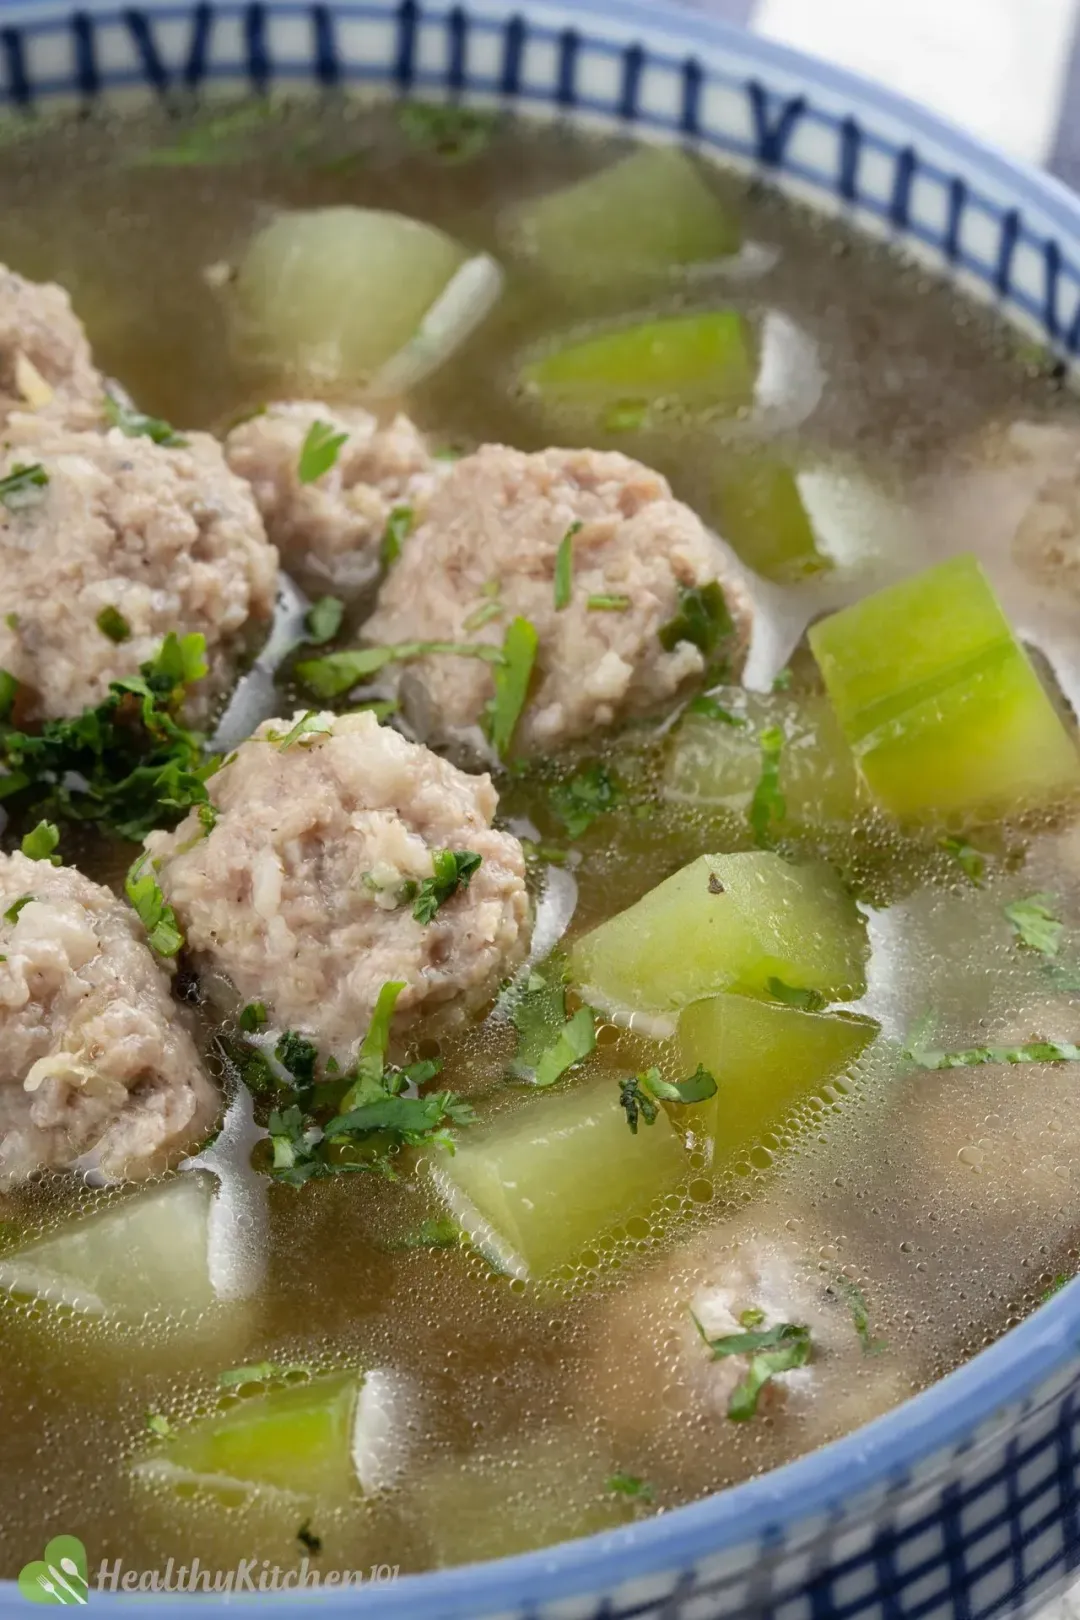 Calories in Meatball Soup